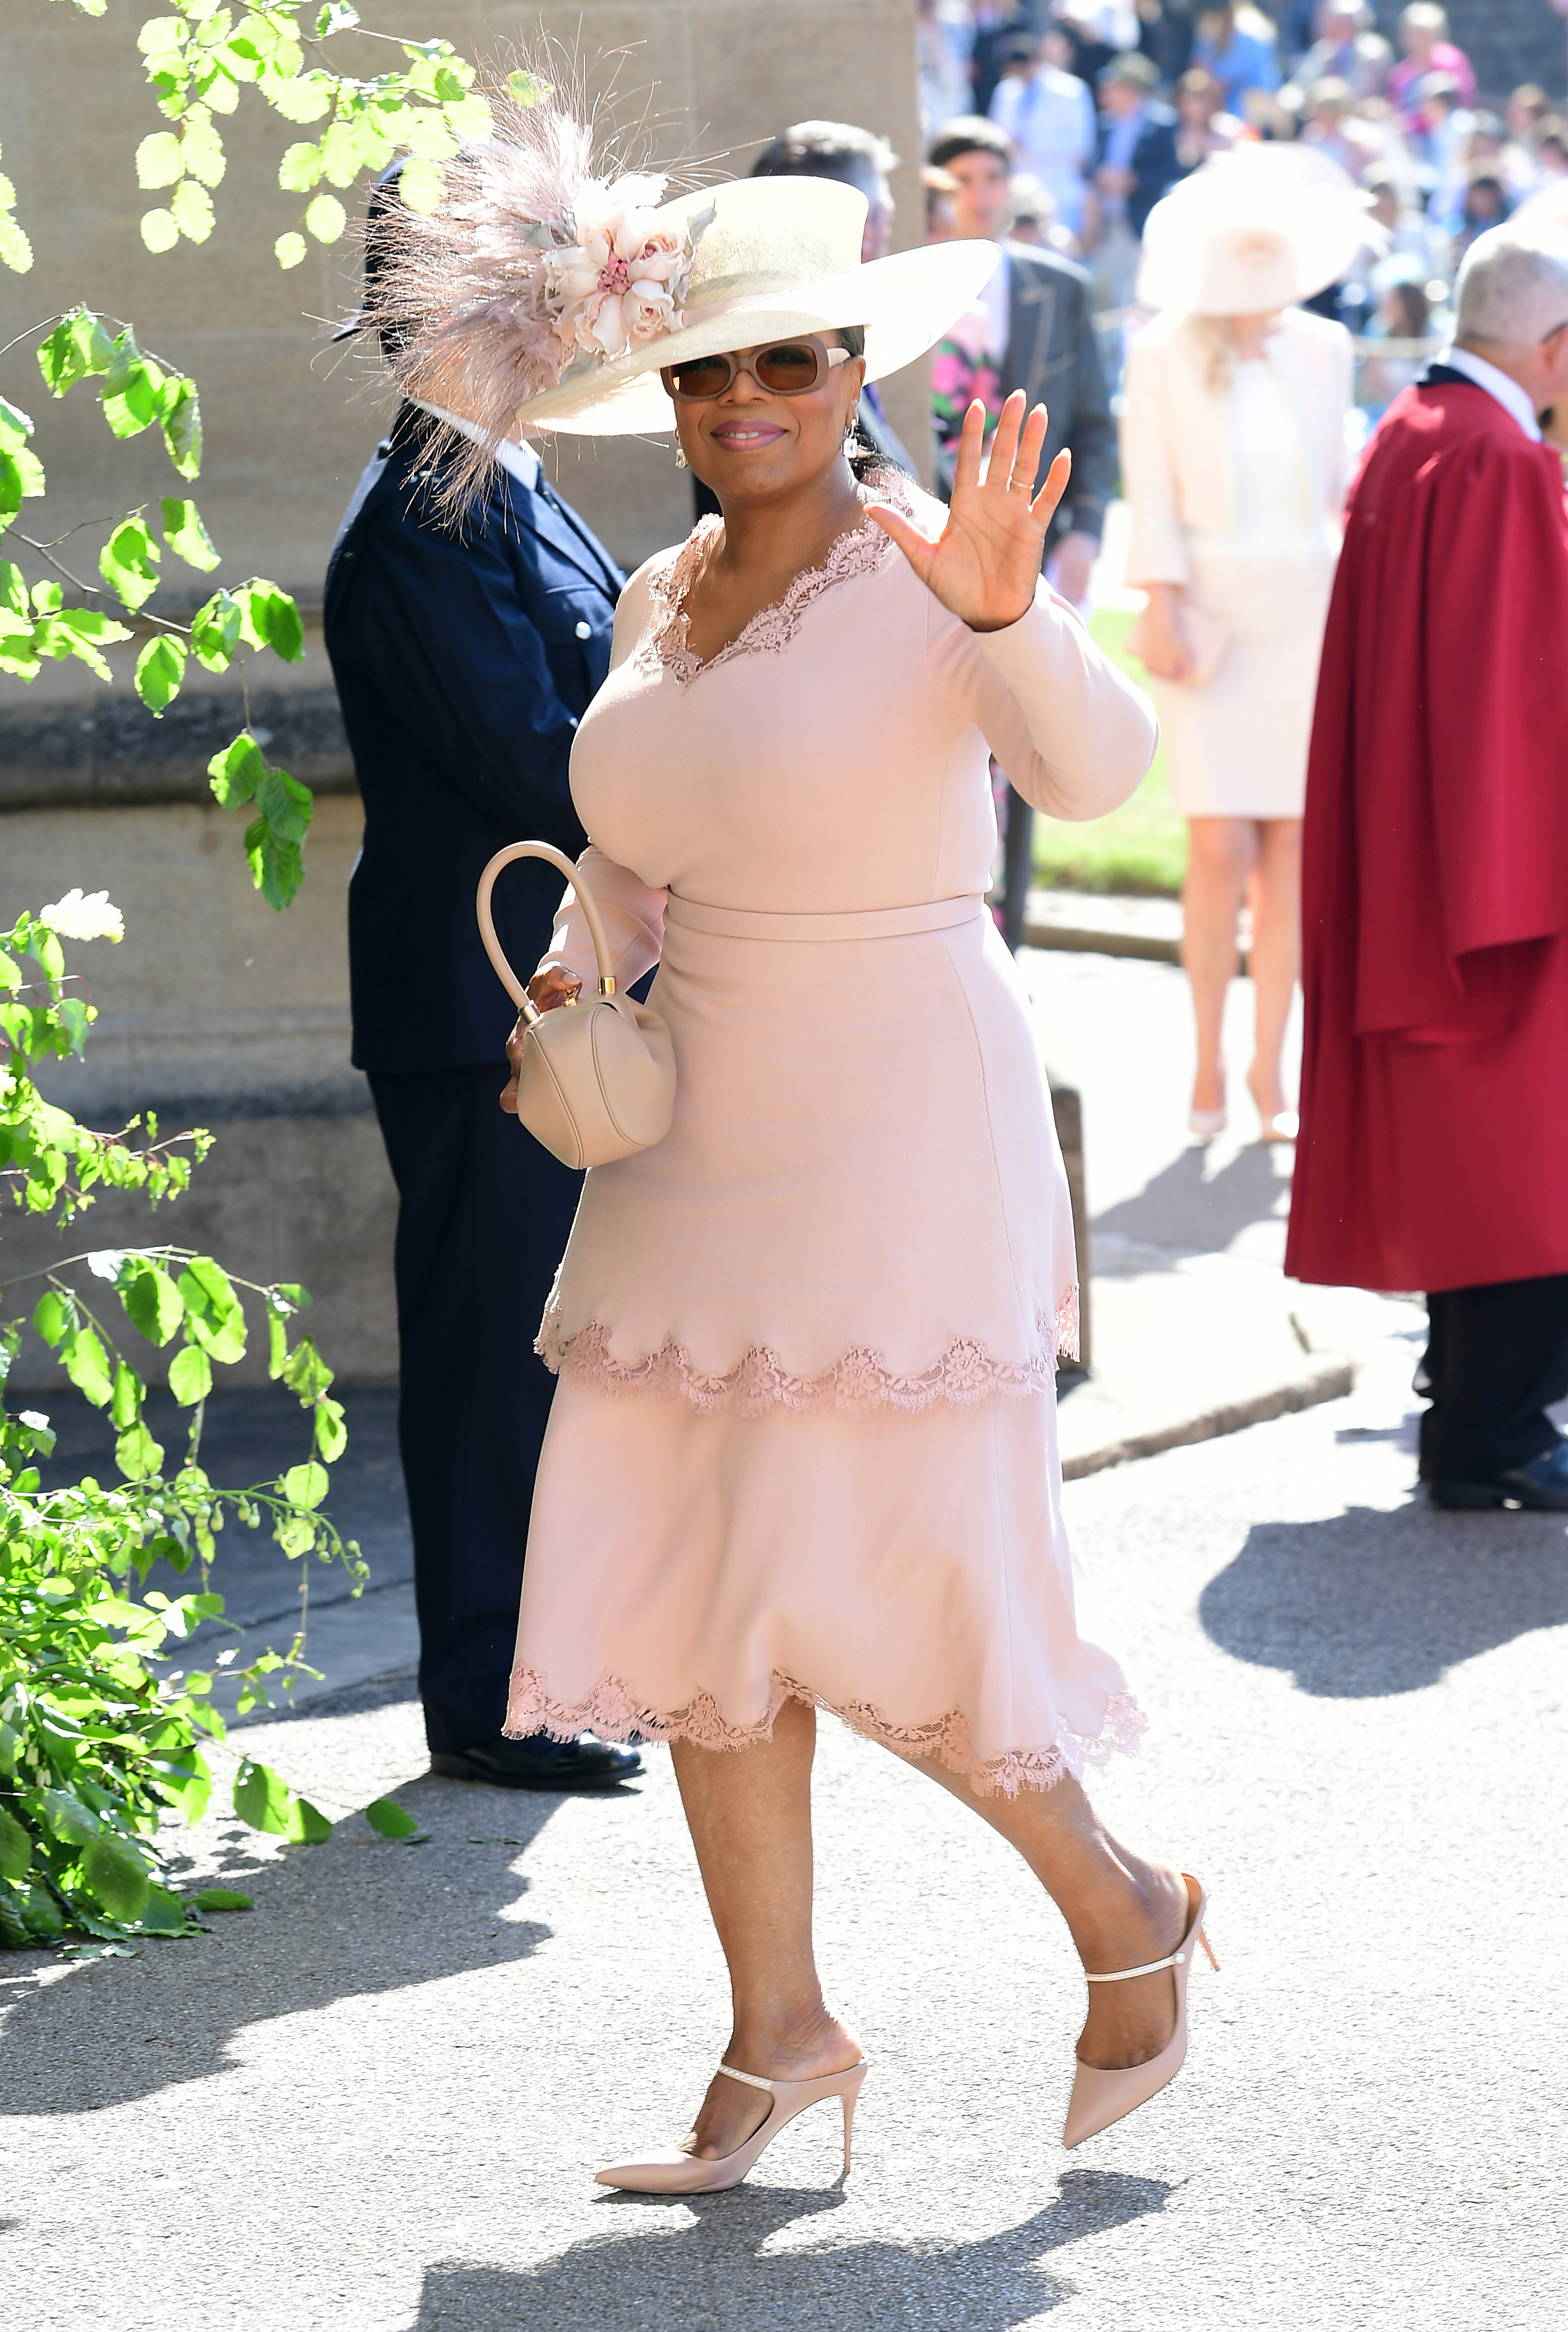 Oprah Winfrey arrives at St George's Chapel at Windsor Castle for the wedding of Meghan Markle and Prince Harry.